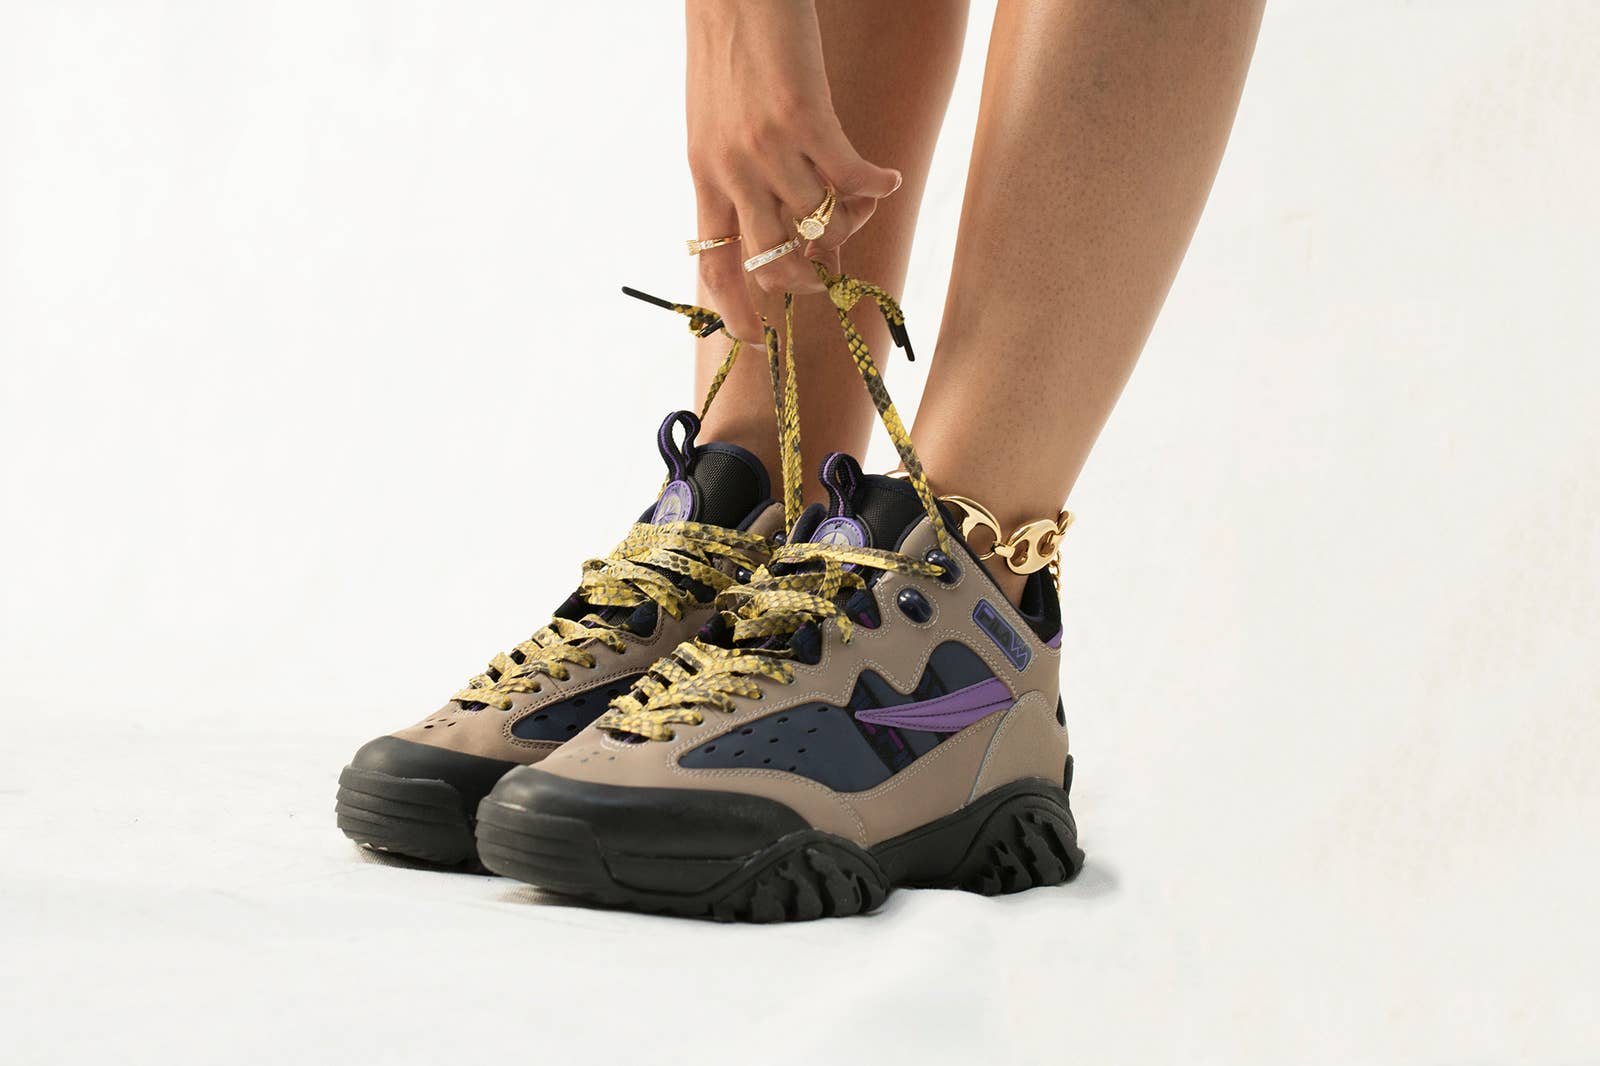 How to Accessorize Your Sneakers featuring the FILA Fixture | Complex